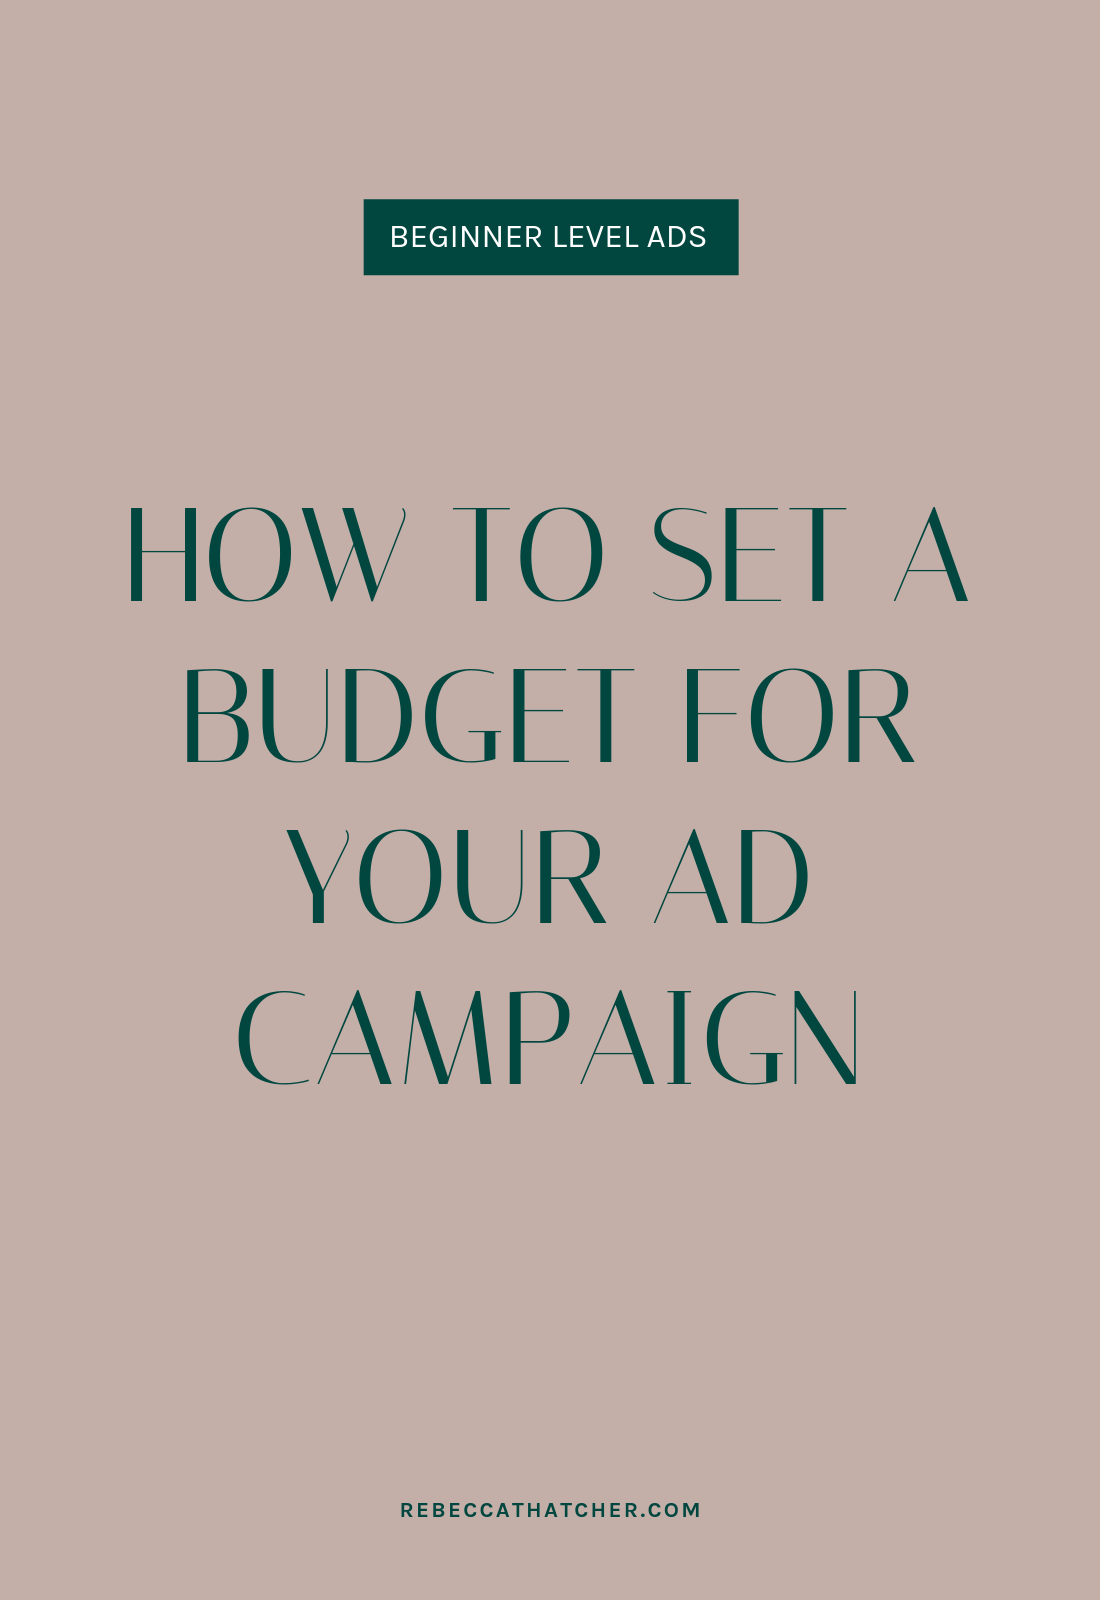 How to set a budget for your Facebook ad campaign | Facebook Ads Strategist | Rebecca Thatcher